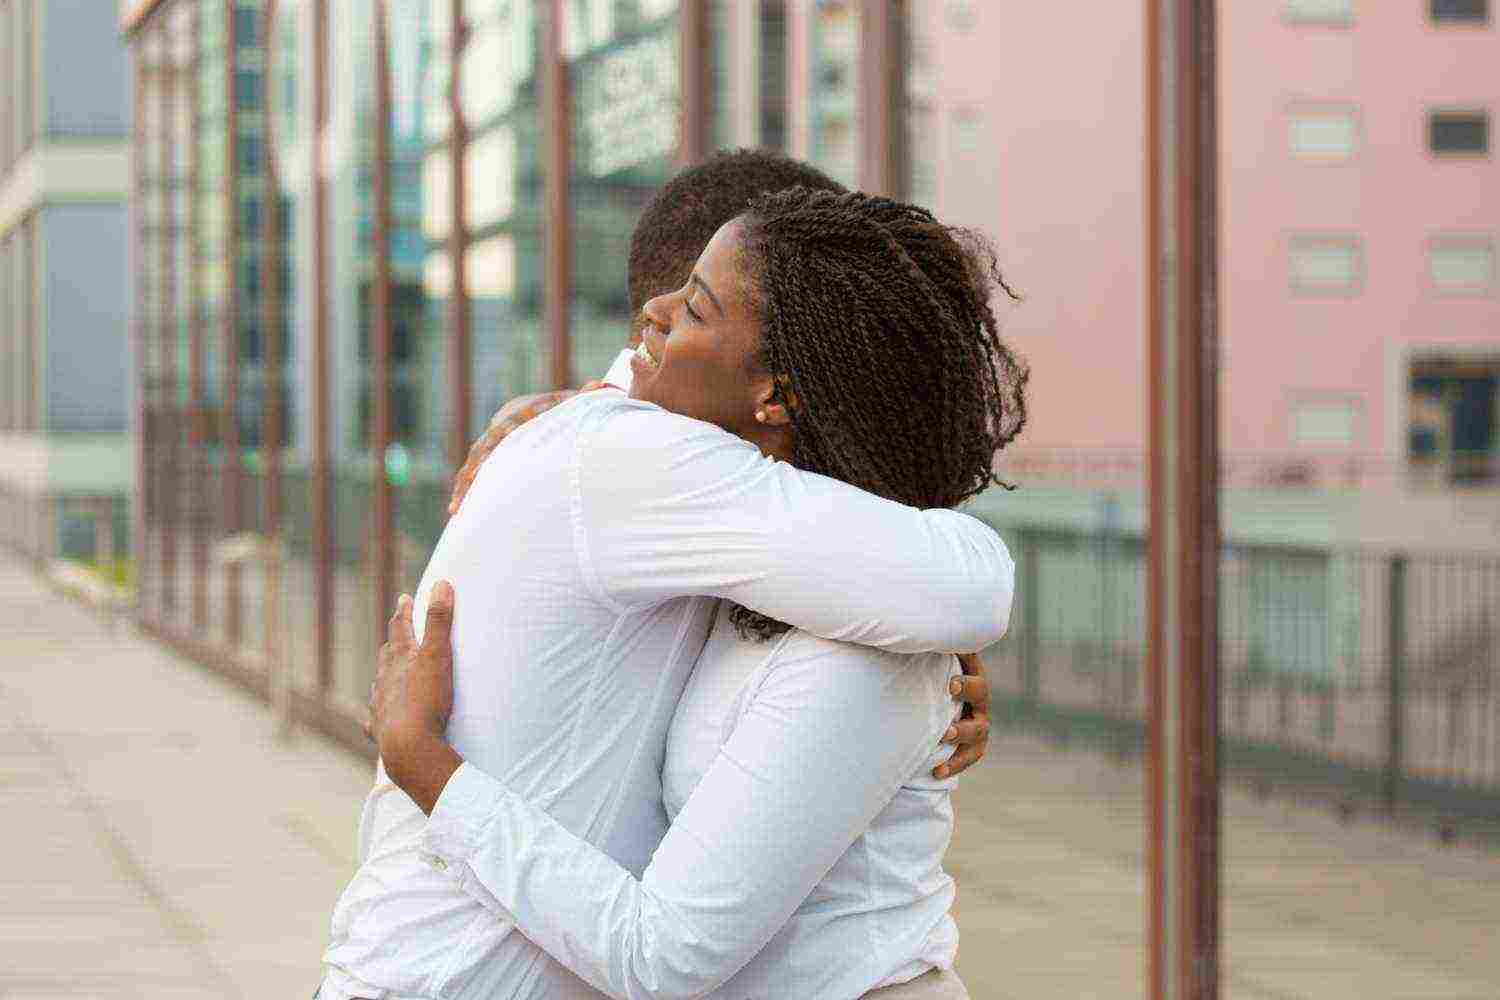 What Does It Mean When A Guy Hugs You Tight When Saying Goodbye?